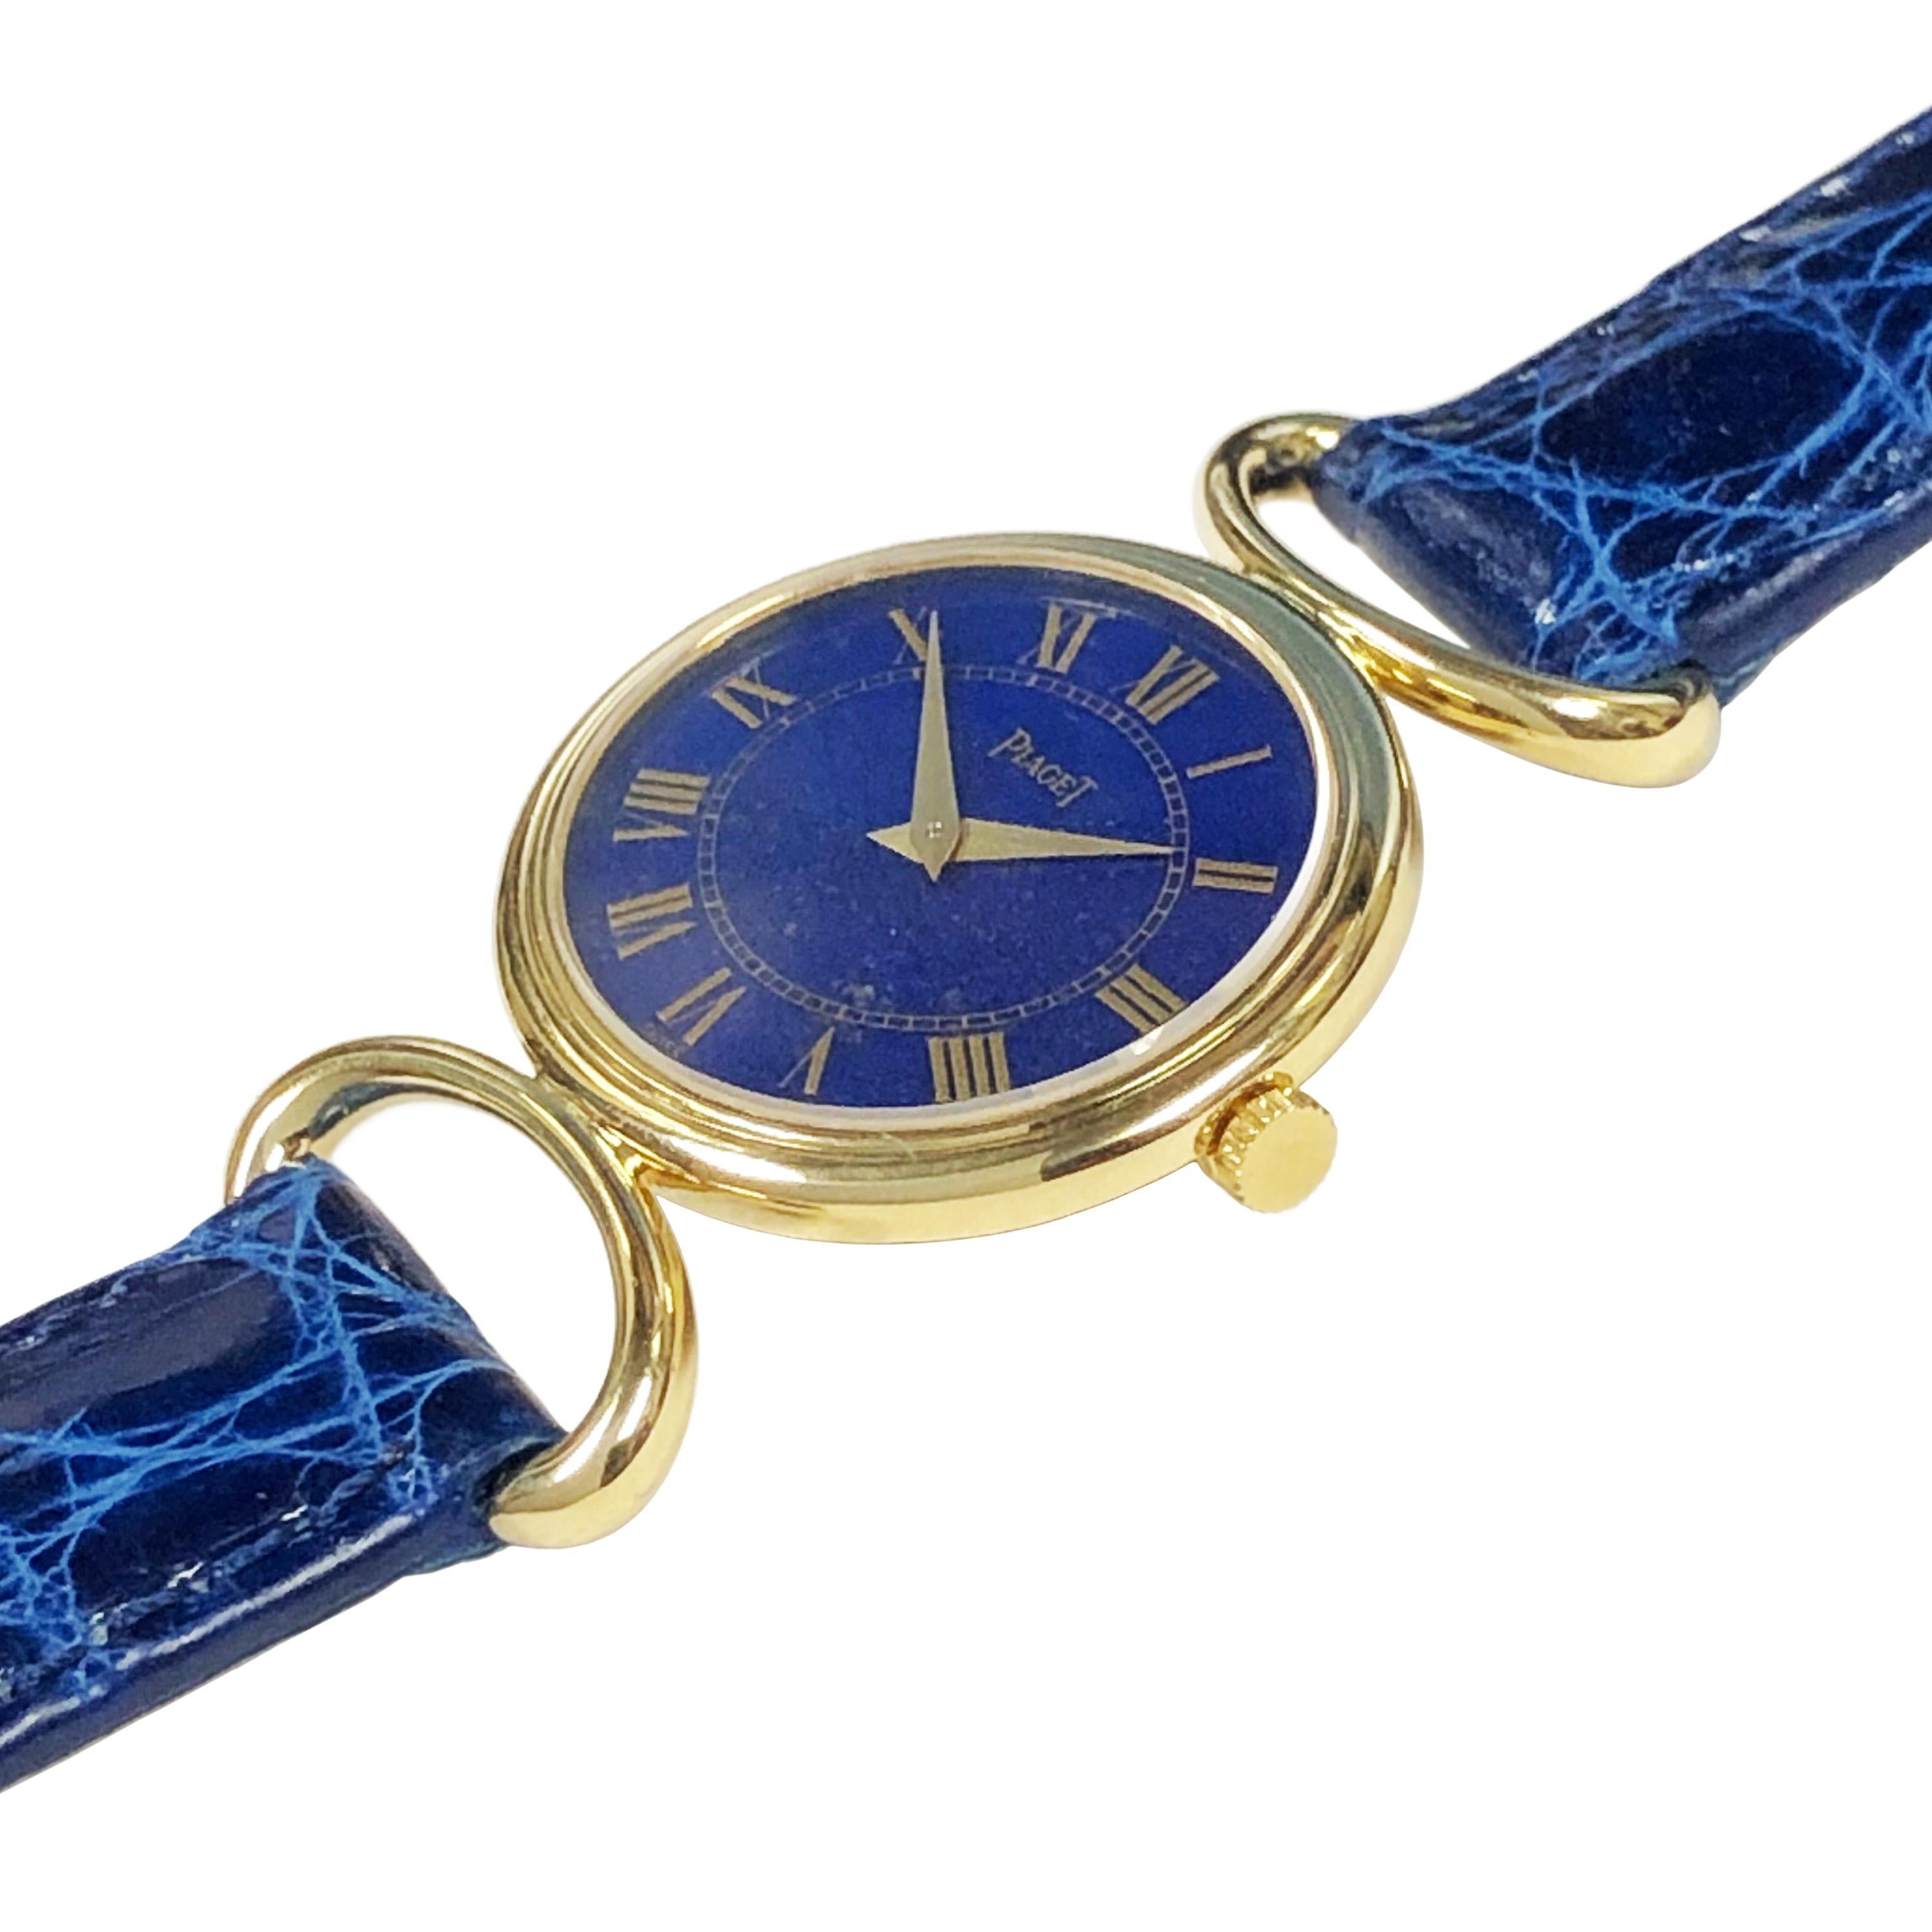 Circa 1980s Piaget Ladies Wrist Watch, 27 X 24 M.M. 18K Yellow Gold 2 Piece case with C curved Lugs, measurement of case with lugs 1 1/2 inches. 17 jewel Mechanical Manual wind Movement. Lapis Lazuli Stone Dial with Gold Printed Roman Numerals. New